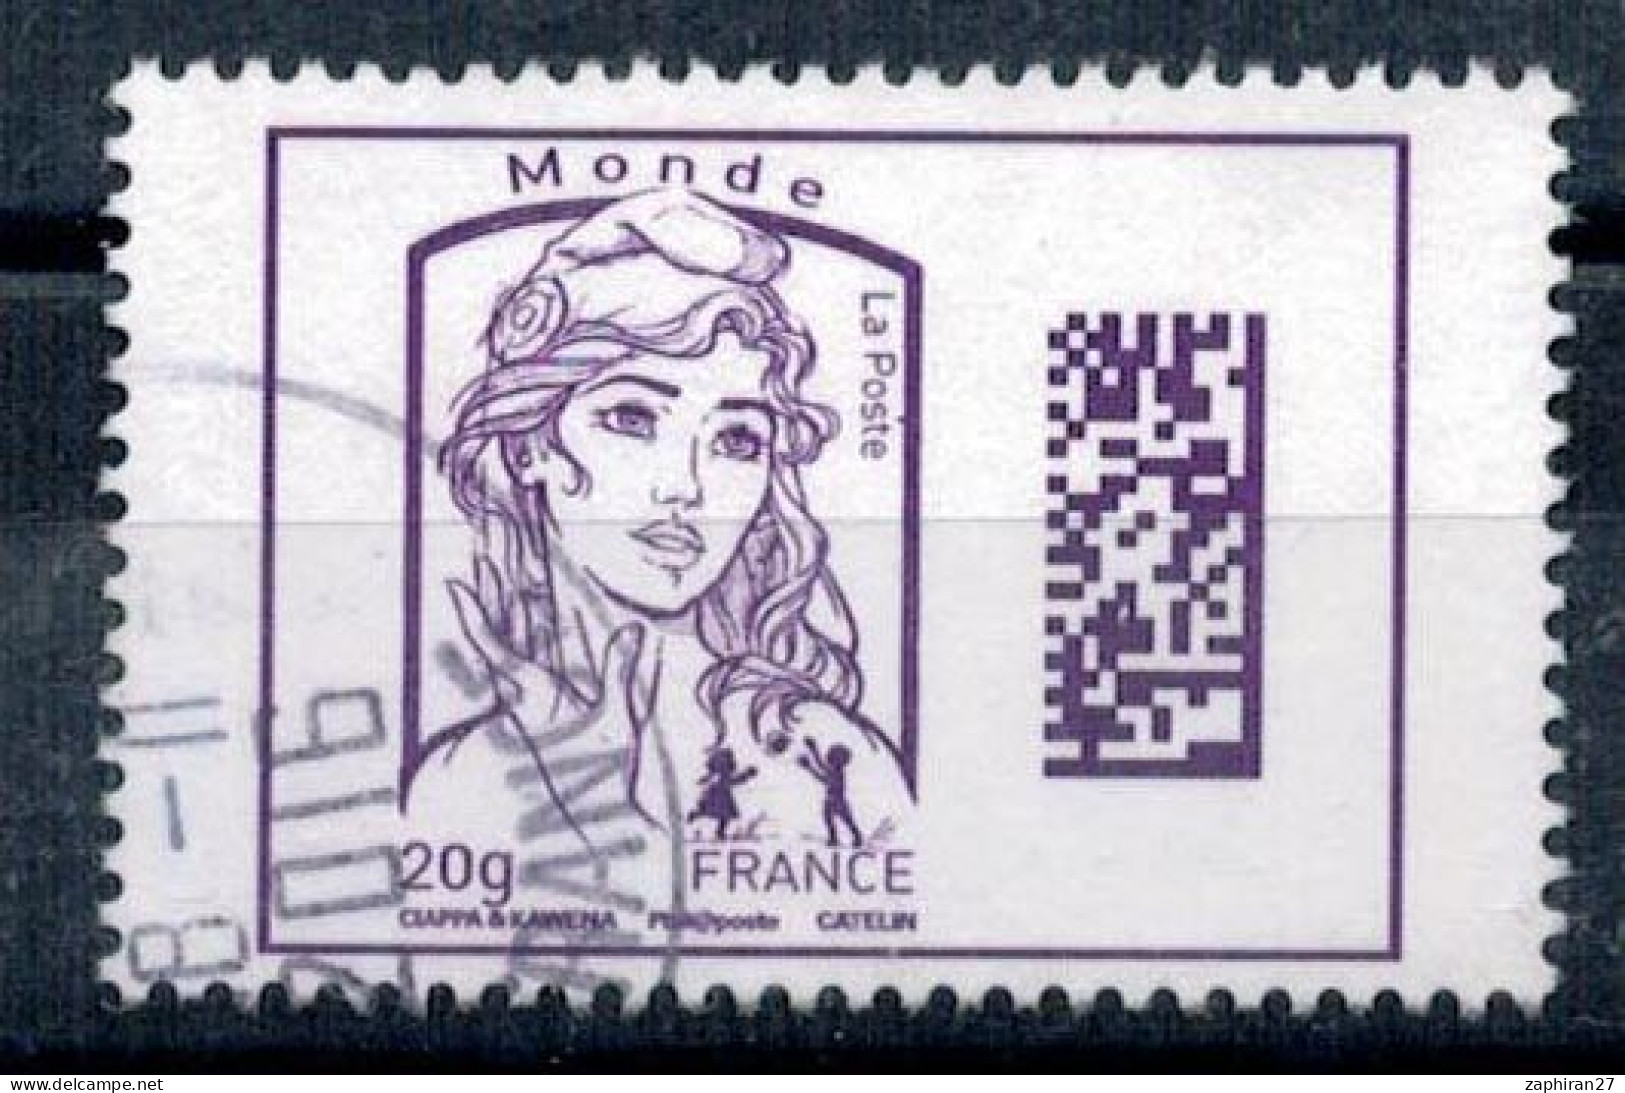 2015 N 4976 MARIANNE CIAPPA DATAMATRIX Mention 20G MONDE OBLITERE  CACHET ROND #234# - Used Stamps